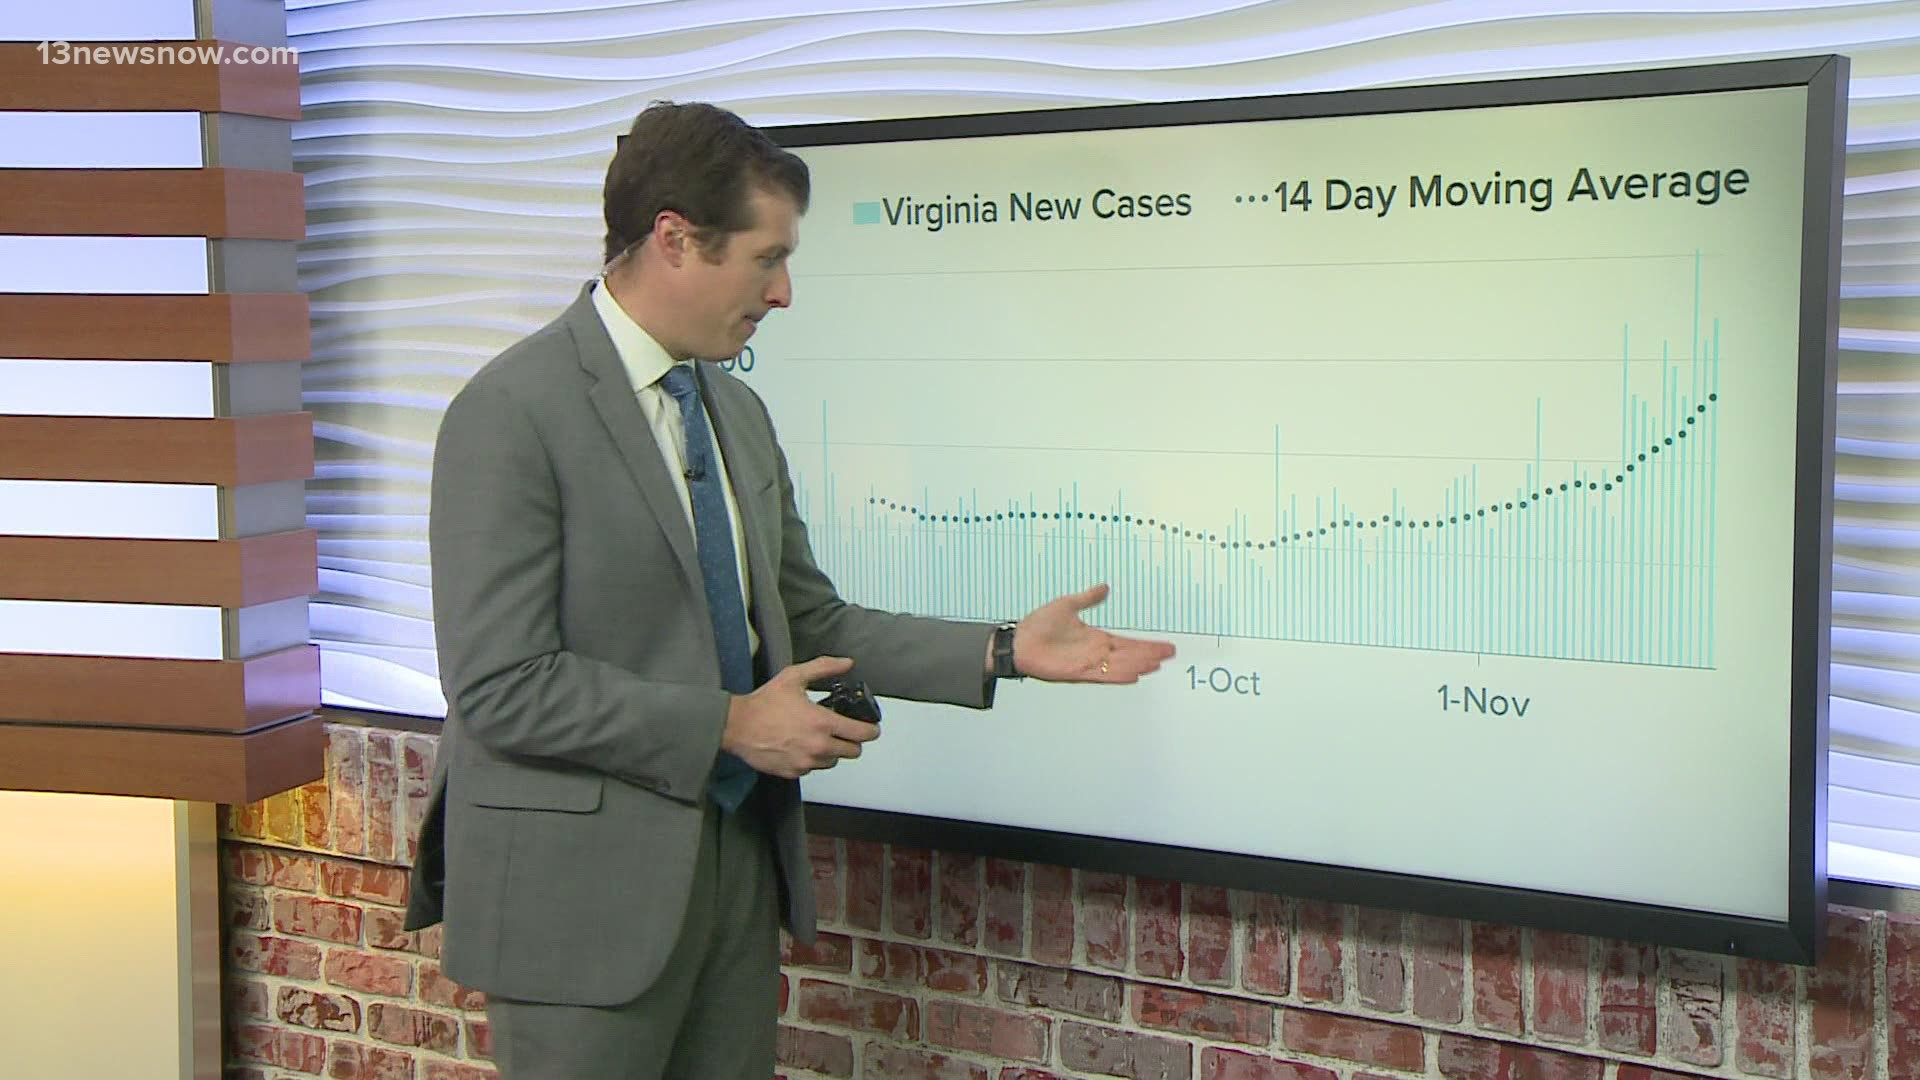 Virginia has had 4,008 coronavirus deaths since the start of the pandemic. The two-weak death average has continued to increase.